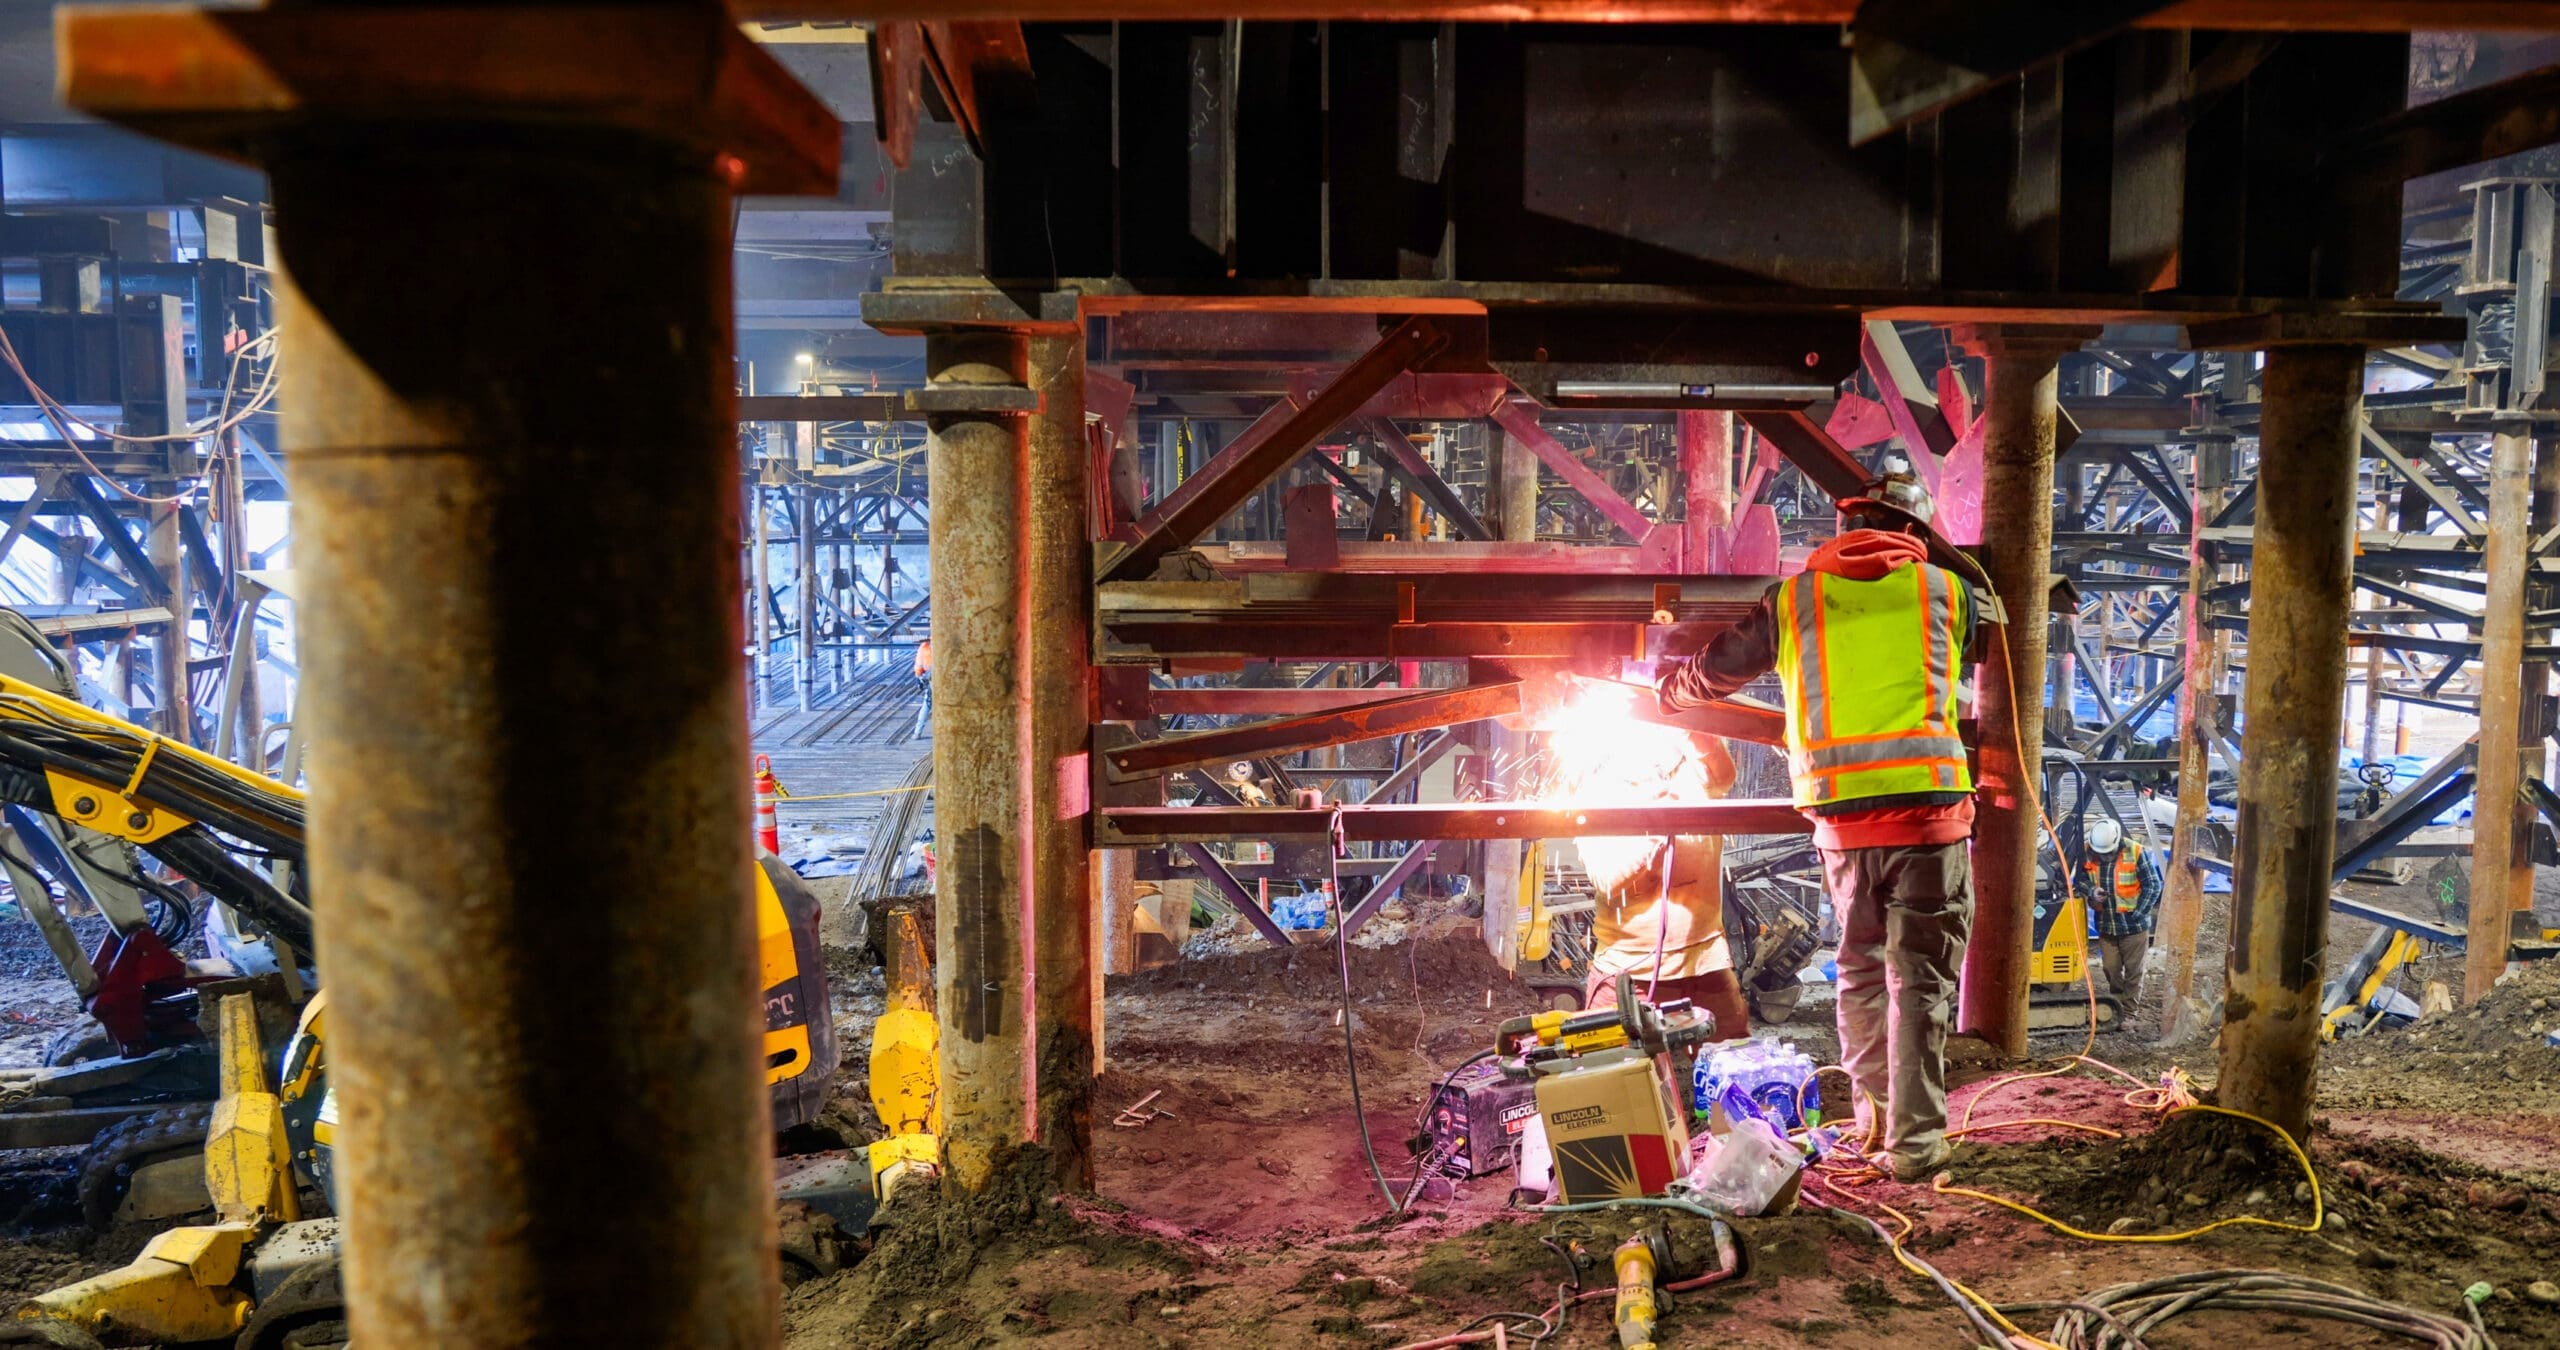 A welder fabricates a steel tower under the Oregon state capitol